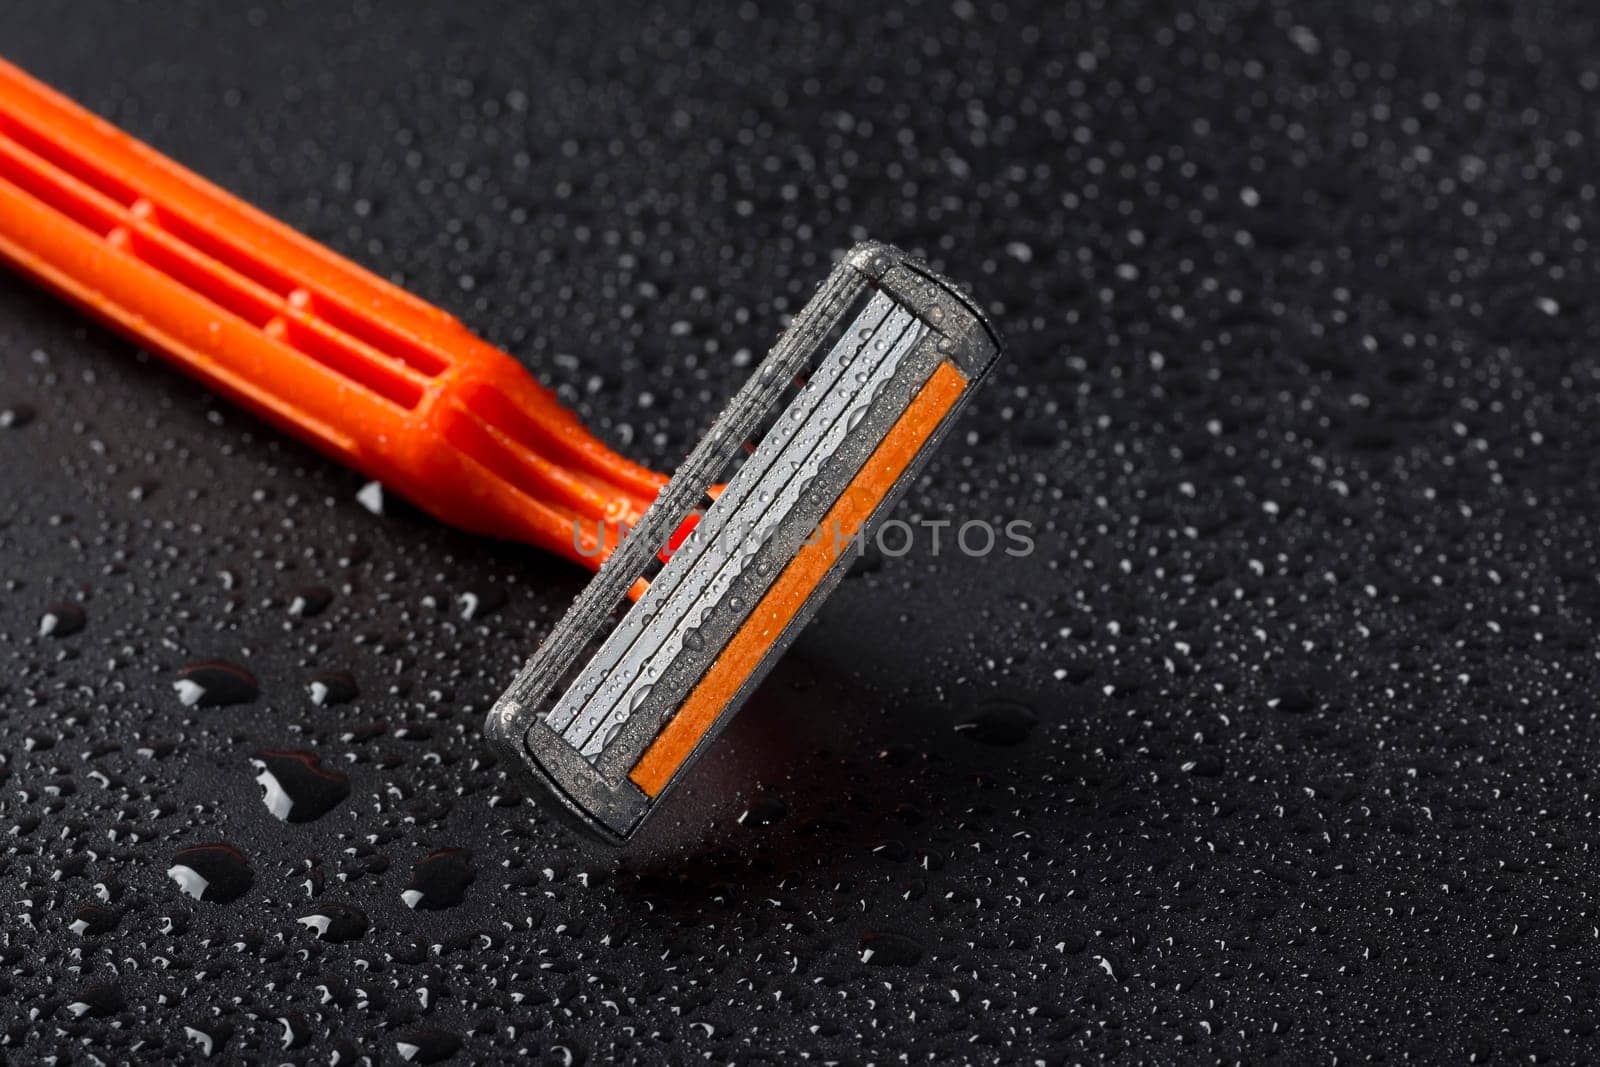 Razor with drops of water on a black background. Close-up. New razor blade. Skin care concept by Shablovskyistock